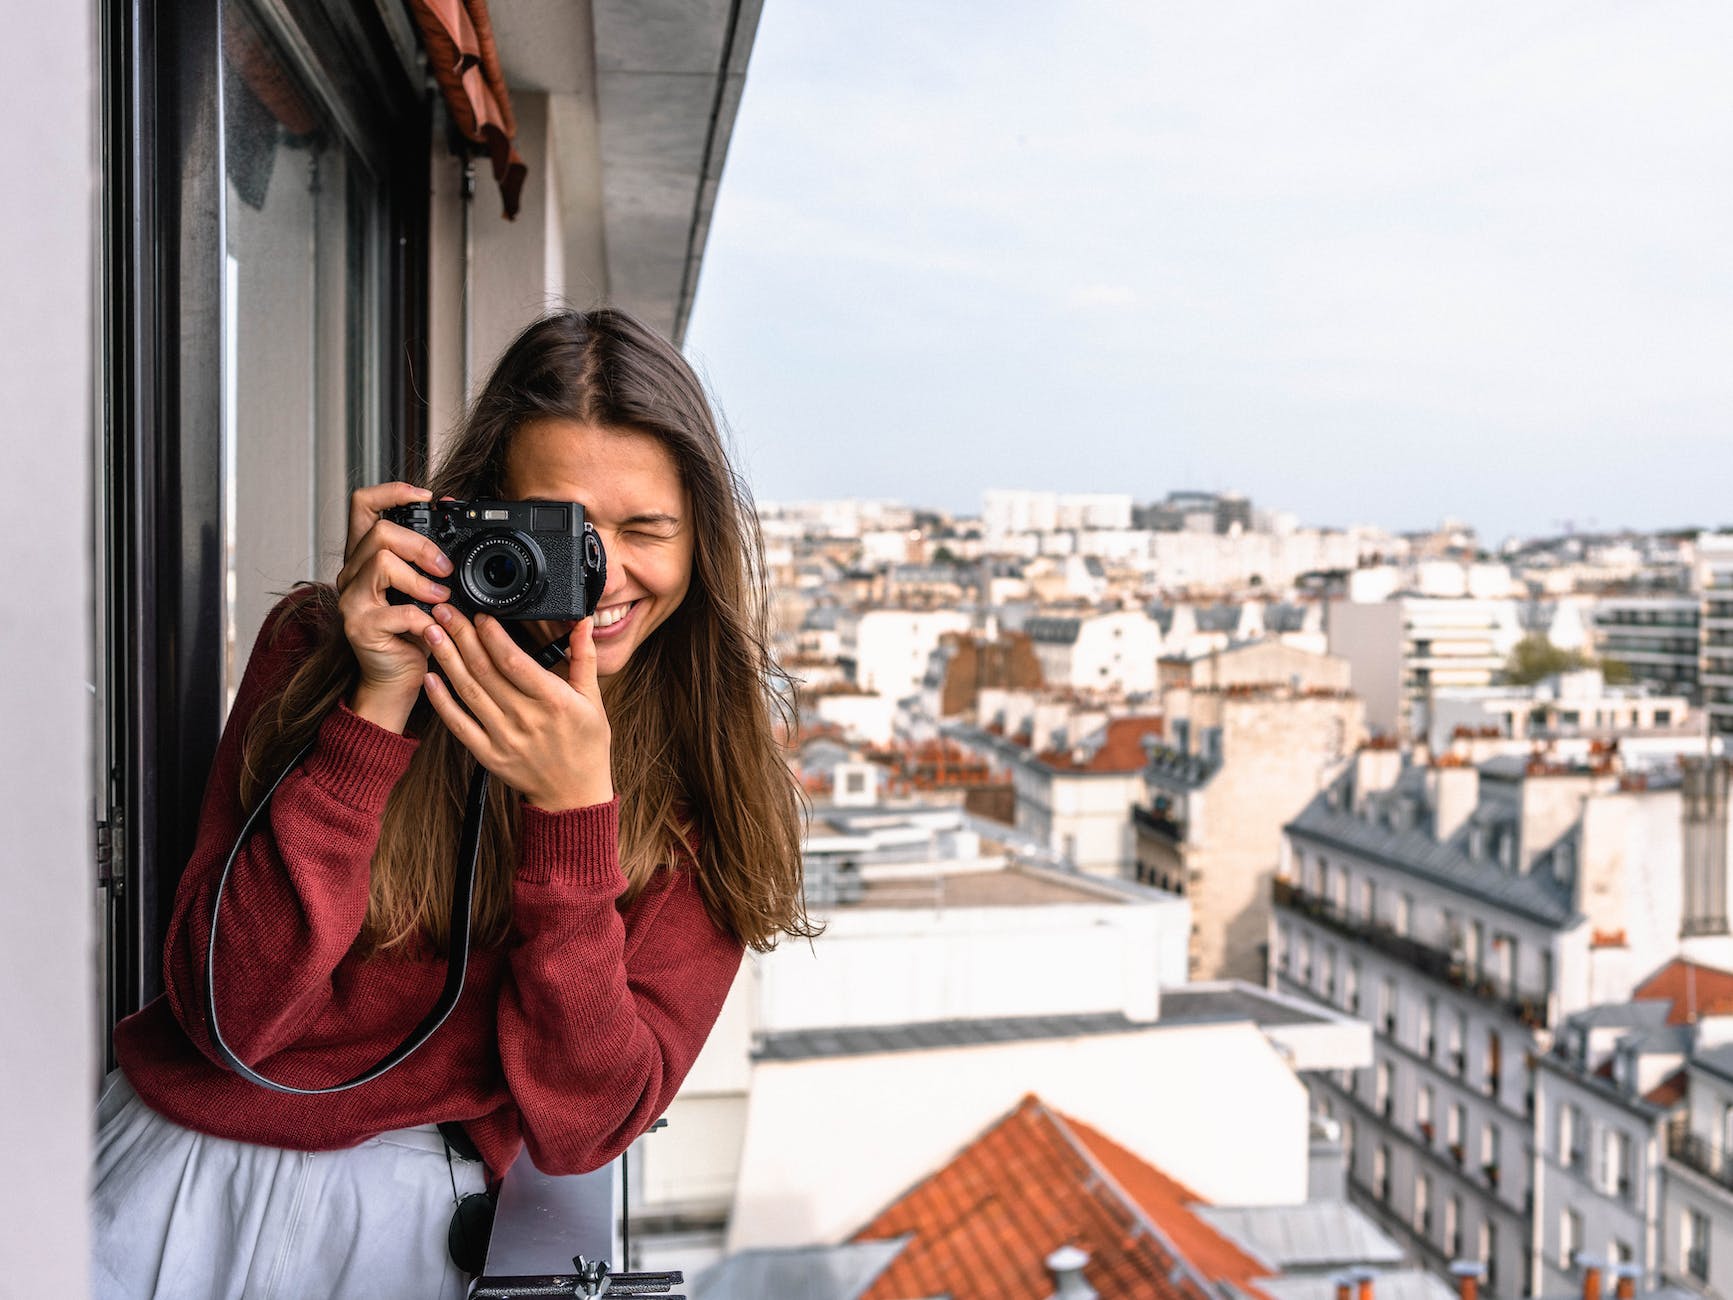 woman wearing maroon sweater standing on veranda using camera while smiling overlooking houses and buildings